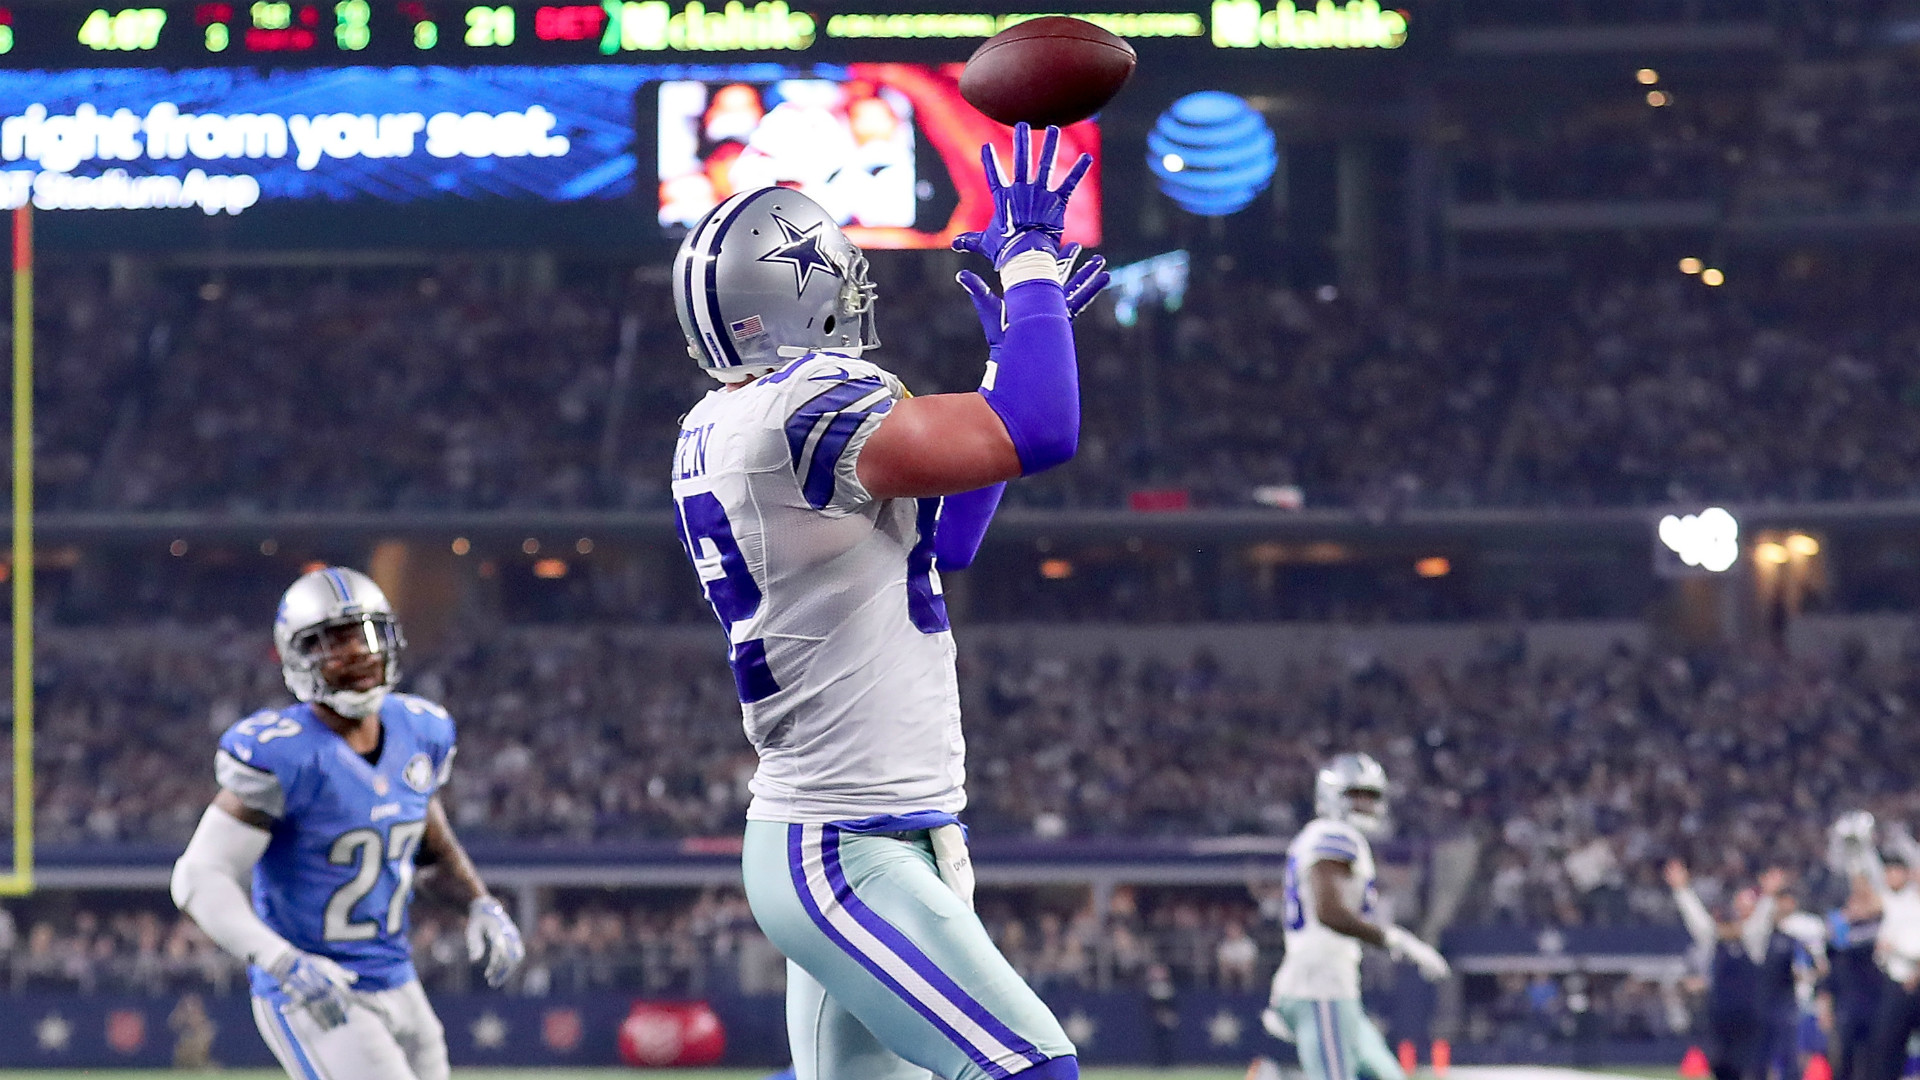 1920x1080 Dallas Cowboys wide receiver Dez Bryant channelled his inner QB with a  ten-yard scoring